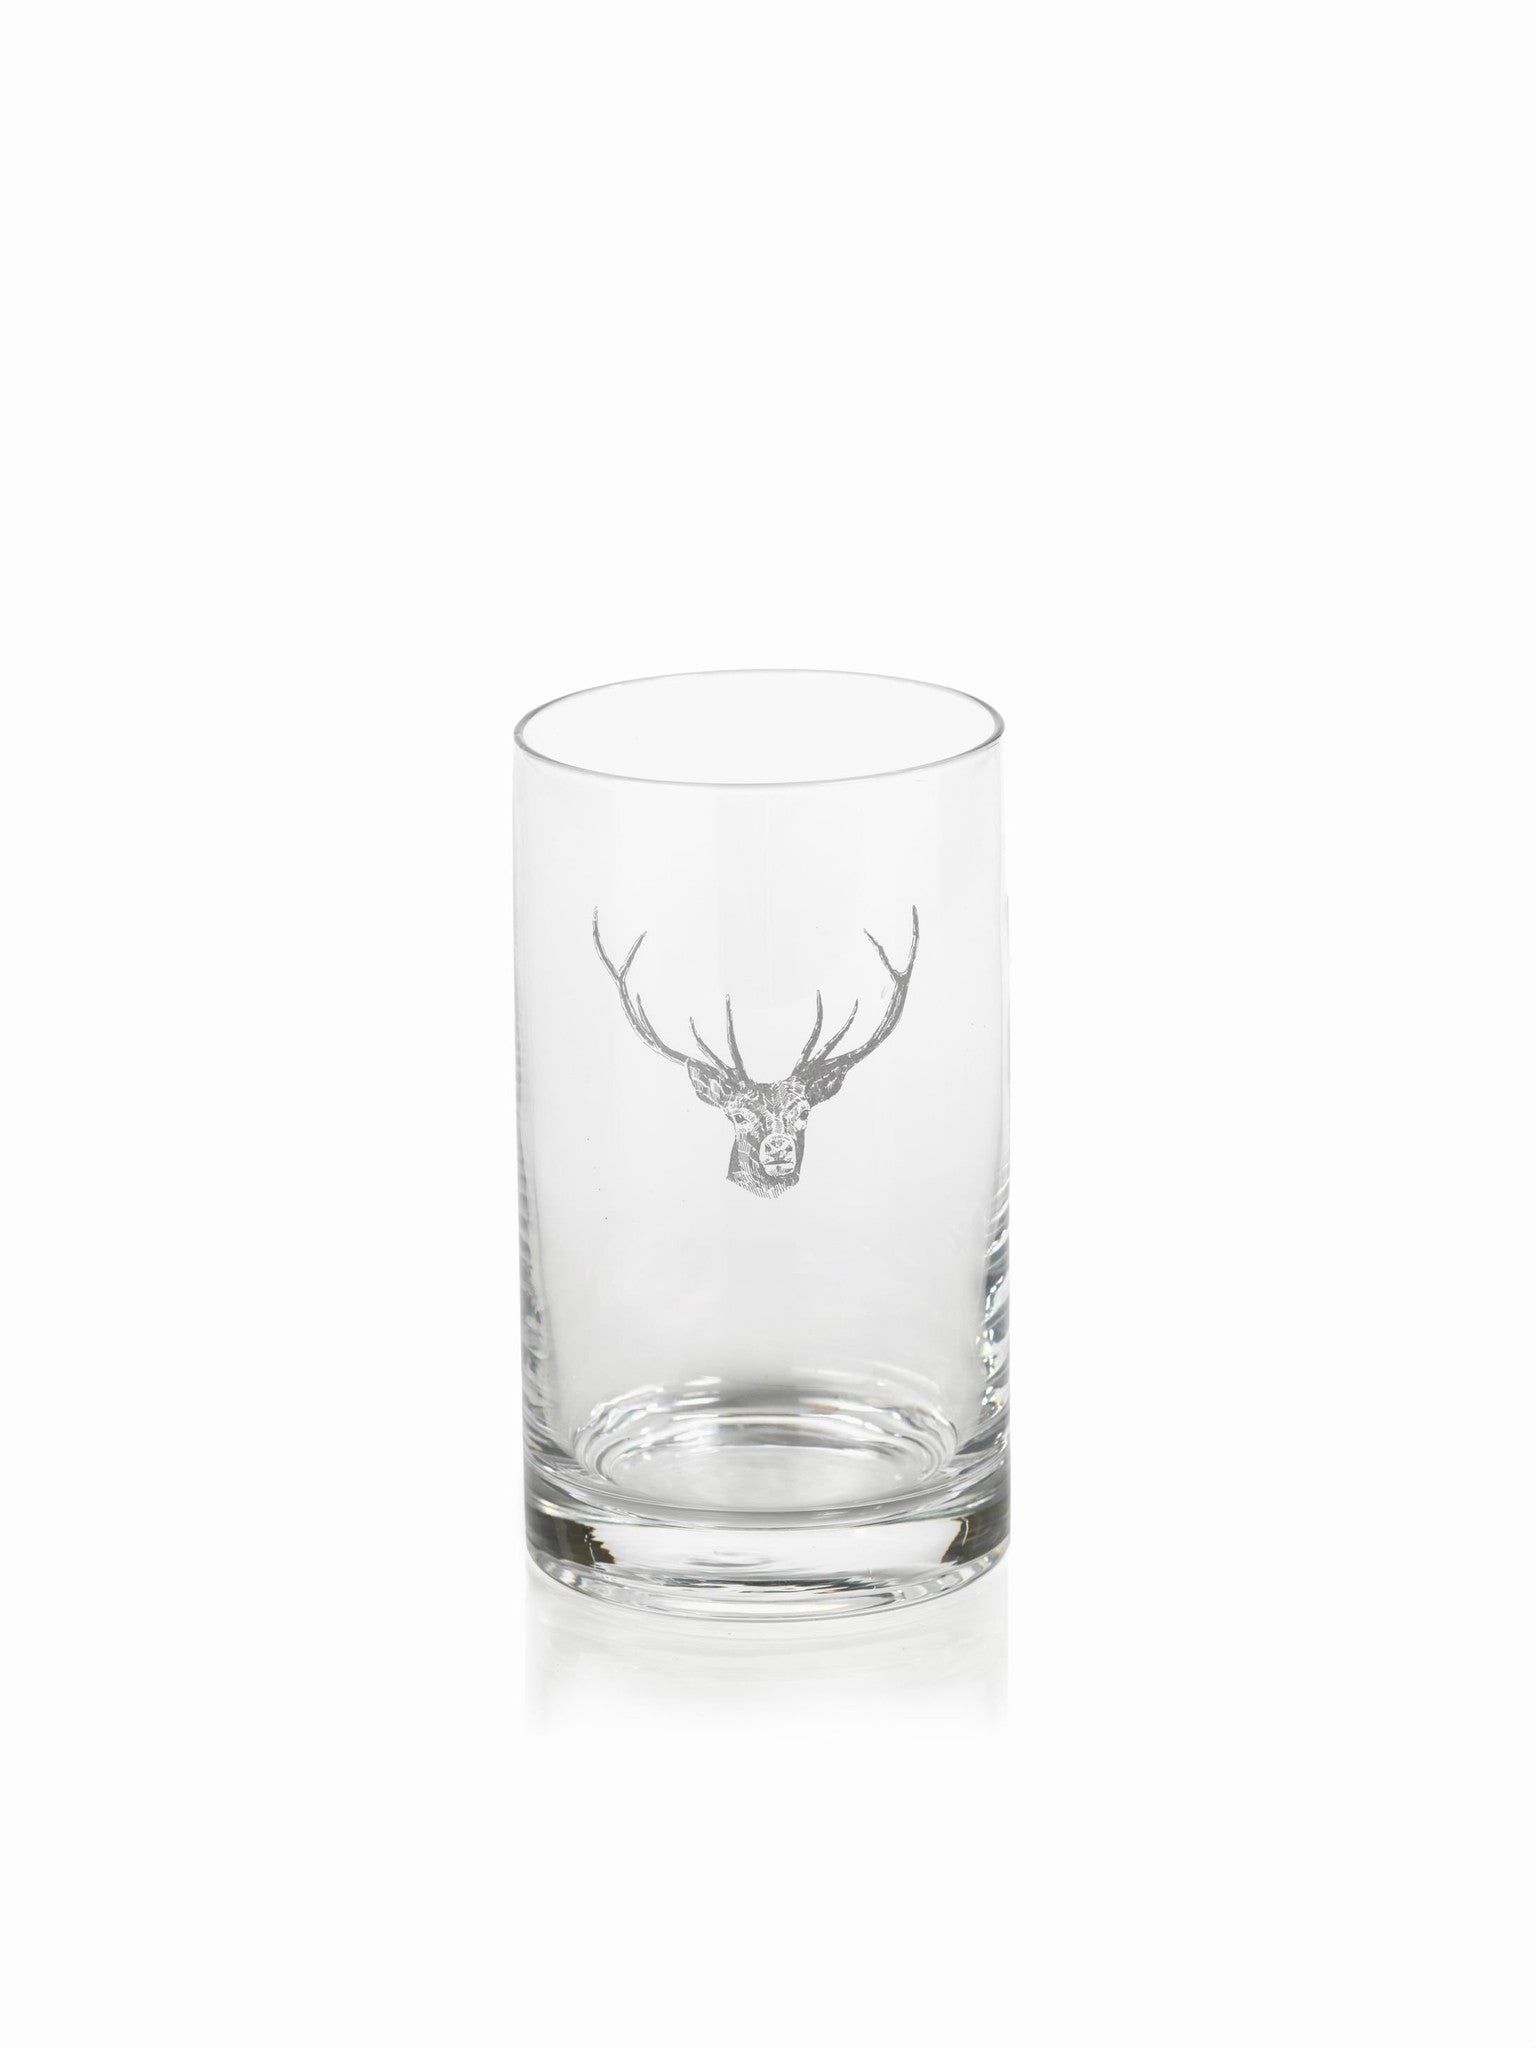 Stag Head Pitcher and Glassware - CARLYLE AVENUE